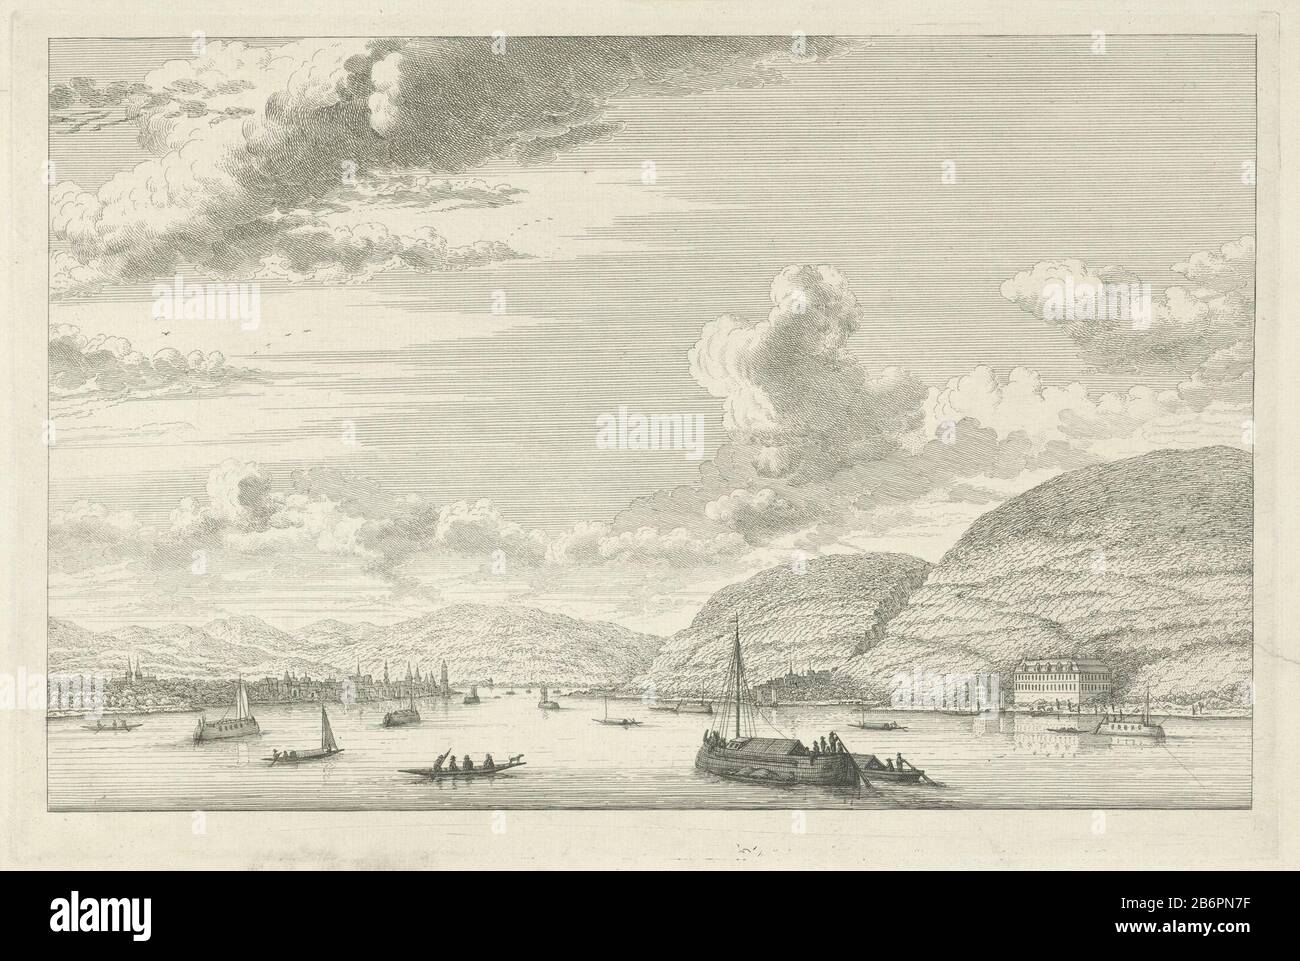 Gezicht op de Rijn nabij een stad Gezichten langs den Rhyn (serietitel) View of the Rhine near a city. To the right is a large country on the shore. The print is a part of a series of prints elfdelige with faces along the Rijn. Manufacturer : print maker: Henry the Lethnaar drawing: Cornelis Ploos van Amstel Publisher: Frederik Willem GreebePlaats manufacture: Amsterdam Date: 1767 Physical characteristics: etching; proofing material: paper Technique: etching Dimensions: plate edge: H 230 mm × W 343 mm Subject: river ships (in general) prospect of city, town panorama, silhouette of city where: Stock Photo